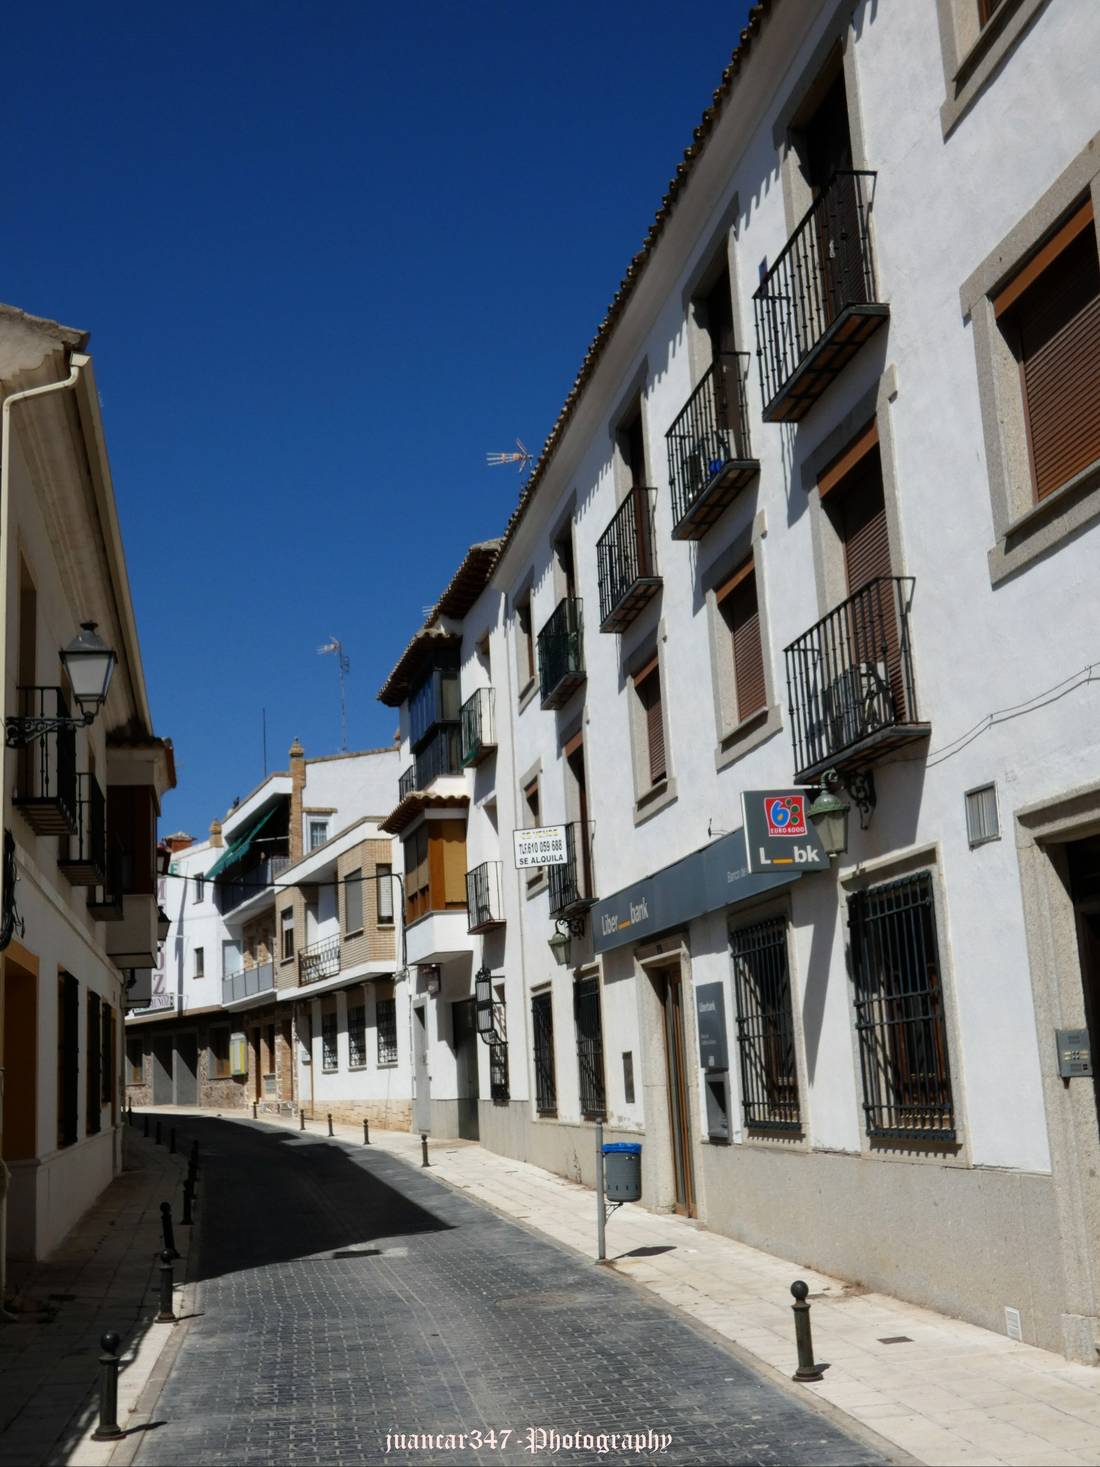 Narrow streets with white facades